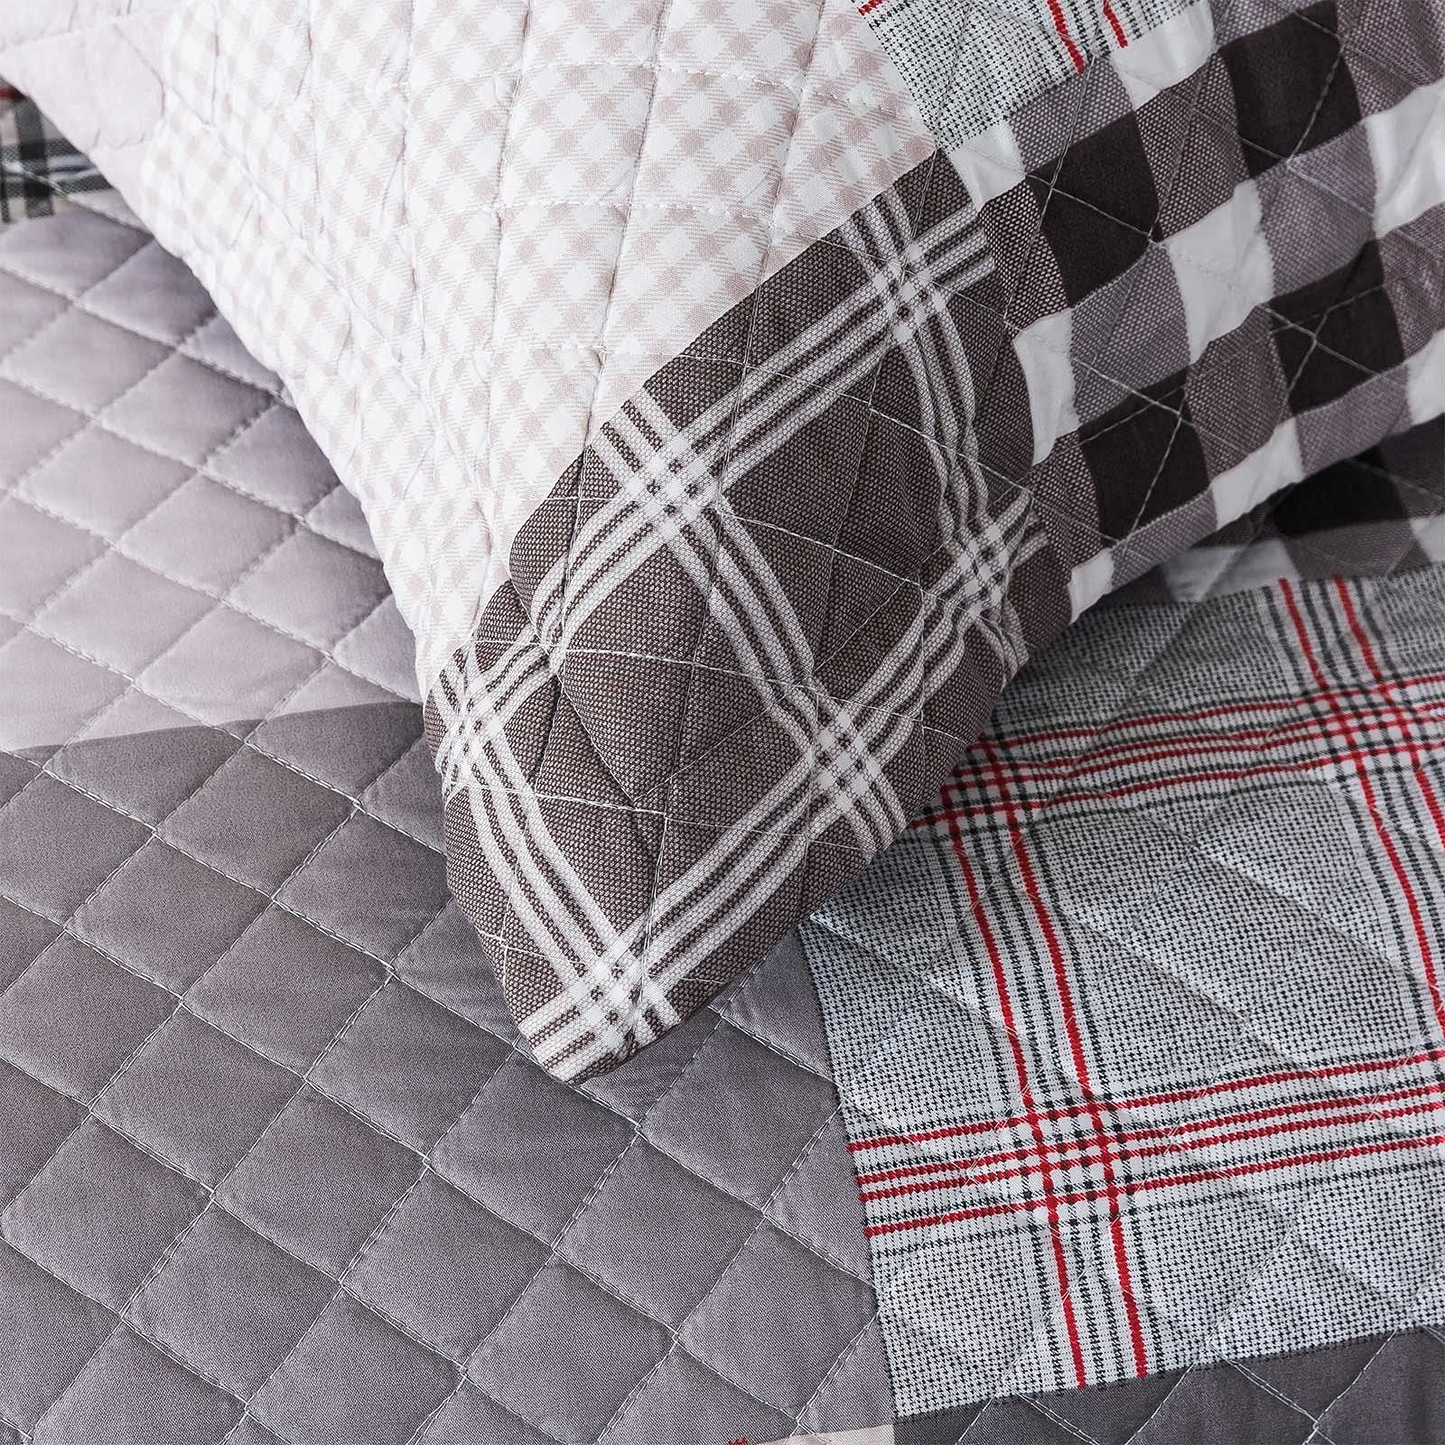 Pure Cotton Pink And Brown Modern Plaid Mosaic 3 Pieces Quilt Set with 2 Pillowcases